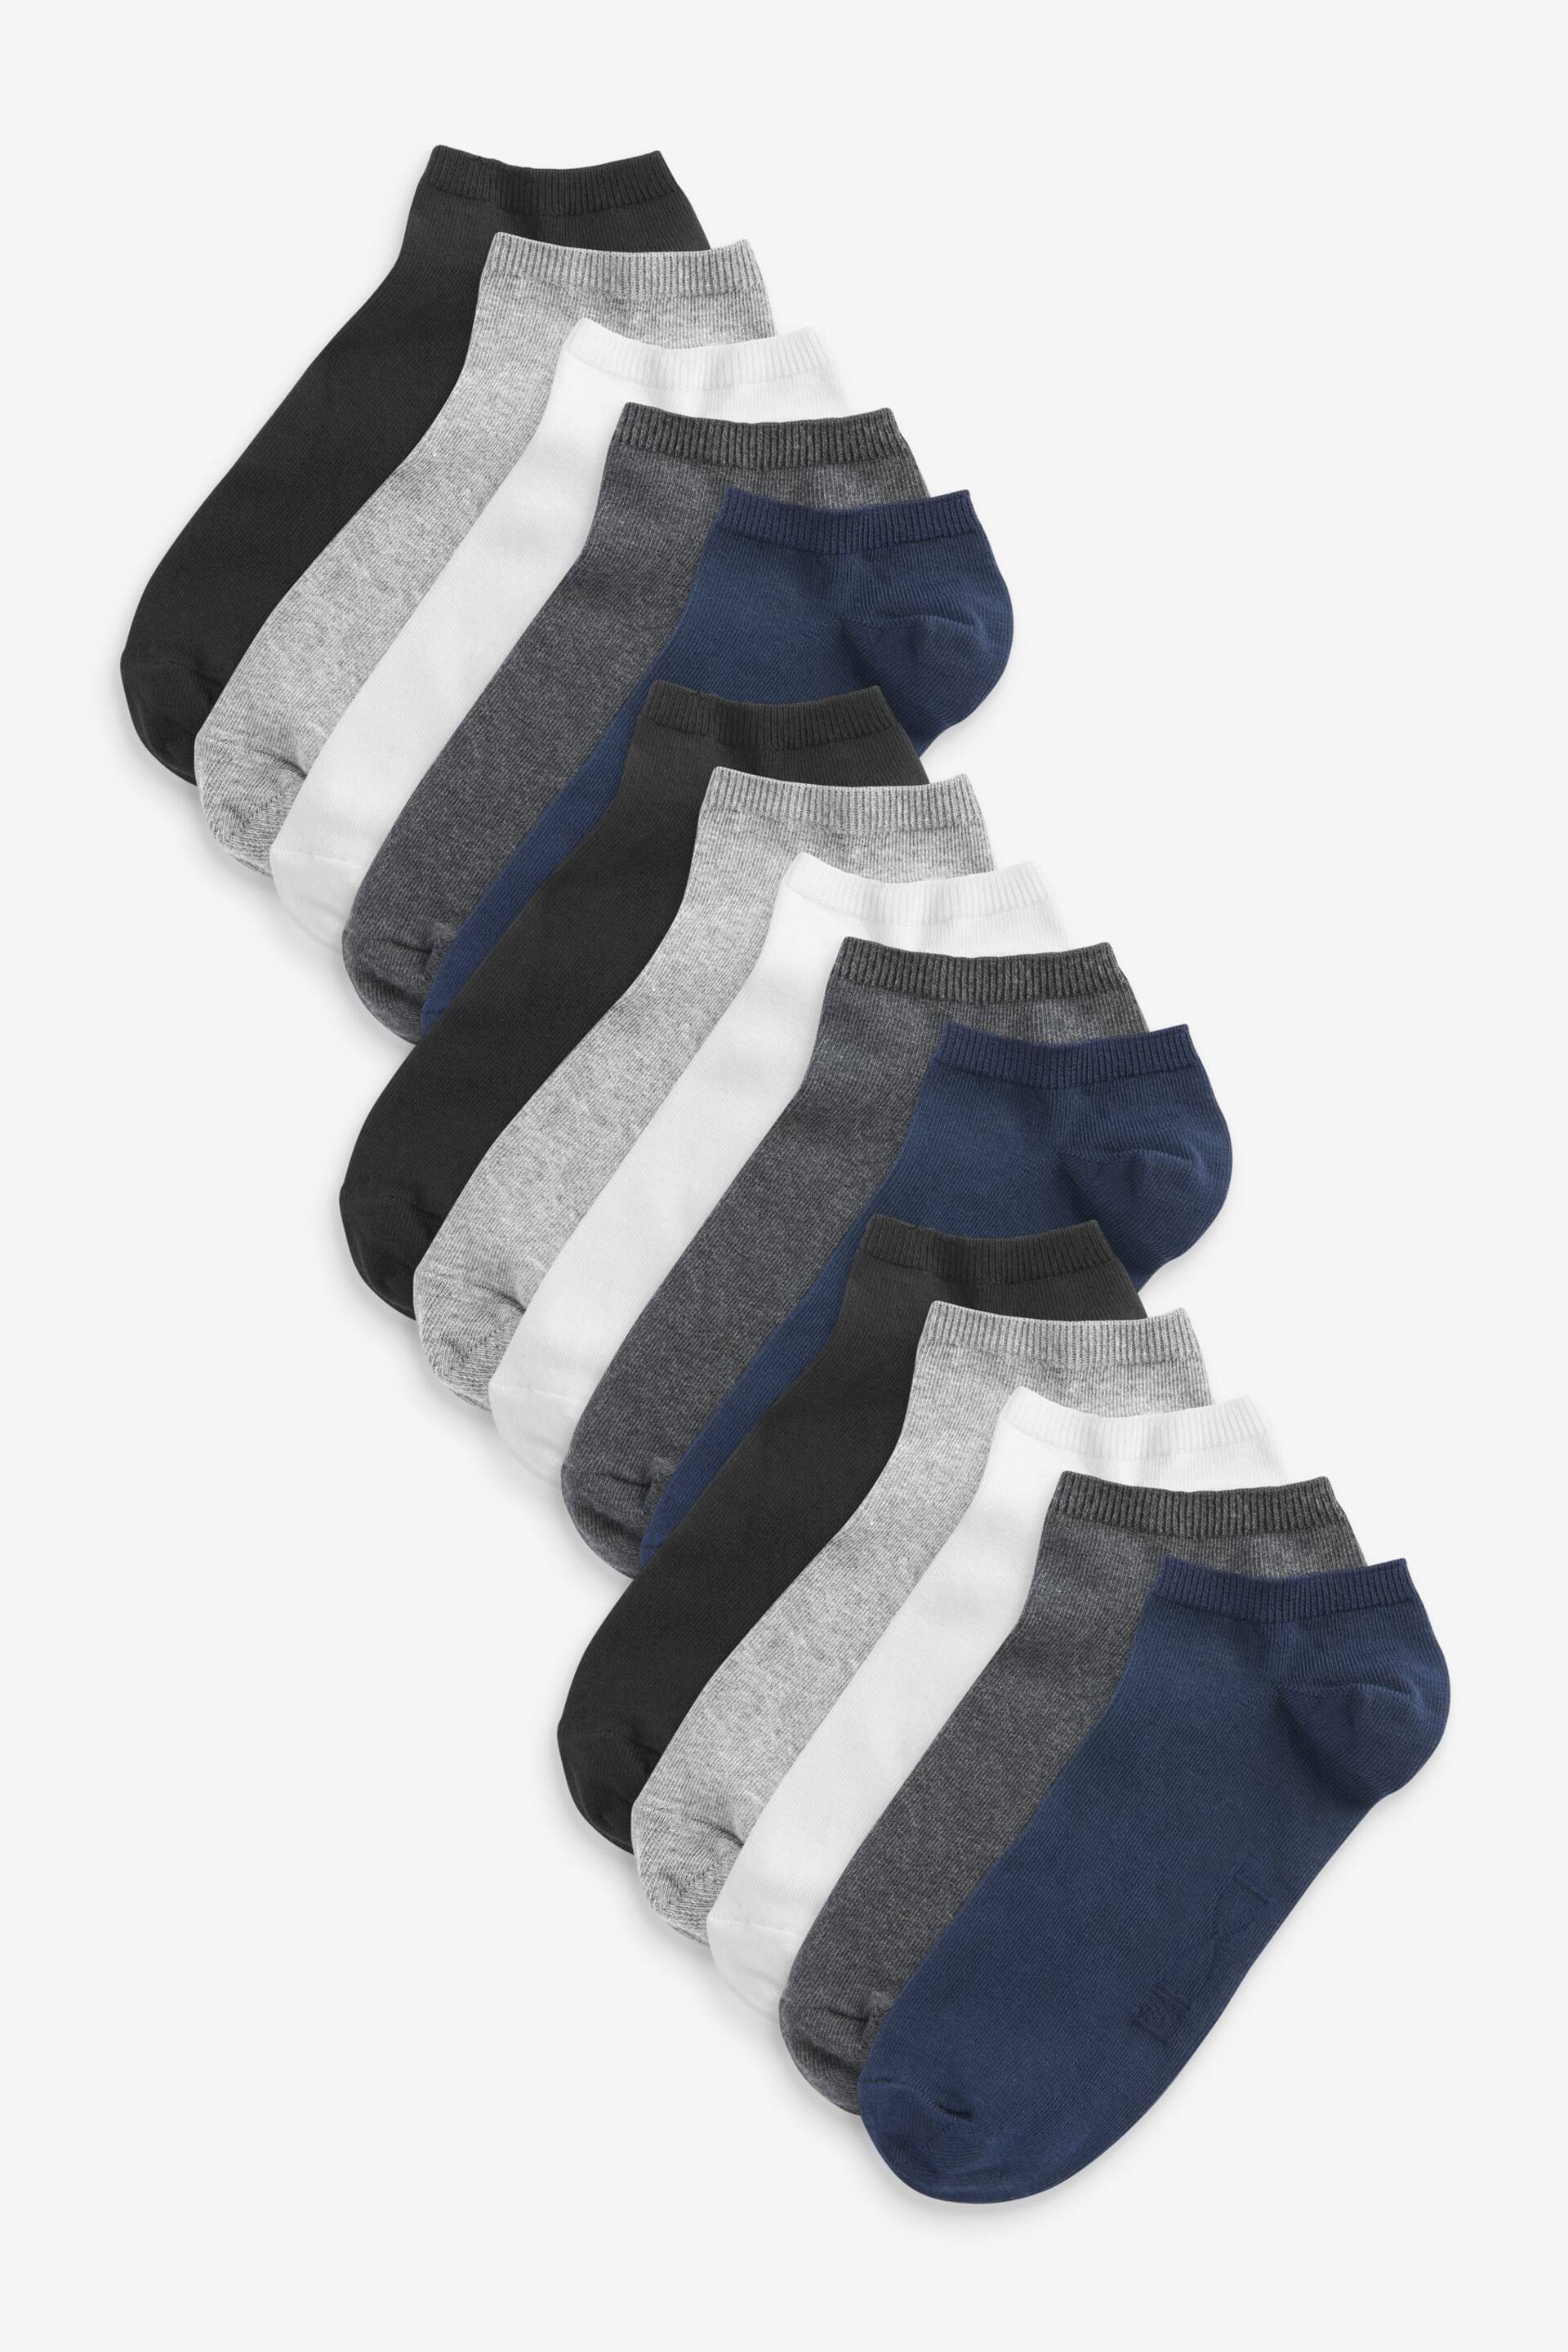 Mixed Colour Trainer Socks 15 Pack - Image 1 of 6